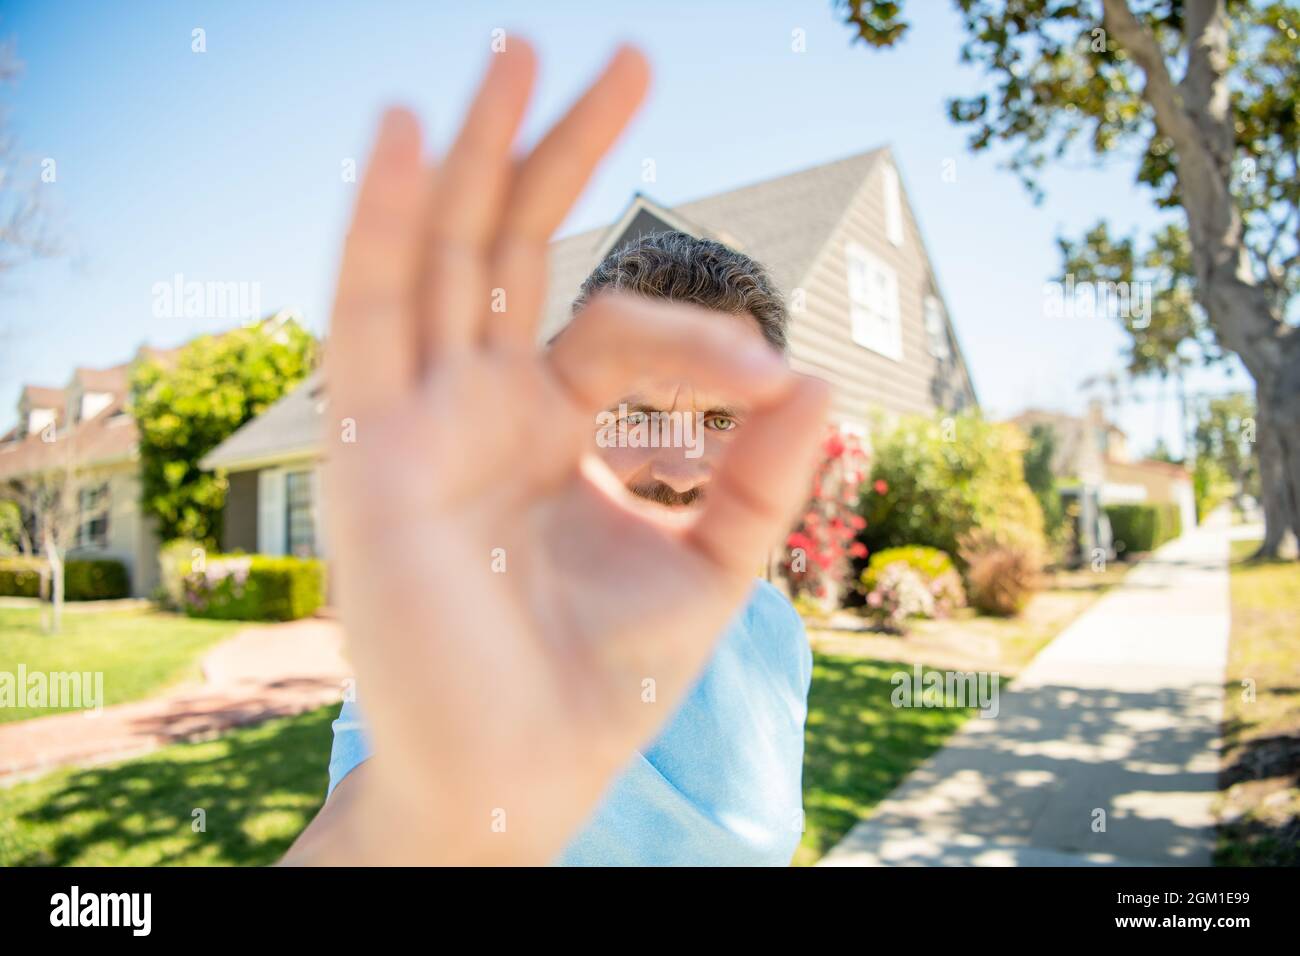 ok gesture. real estate agent at house for sale. realtor welcoming visitors. Stock Photo